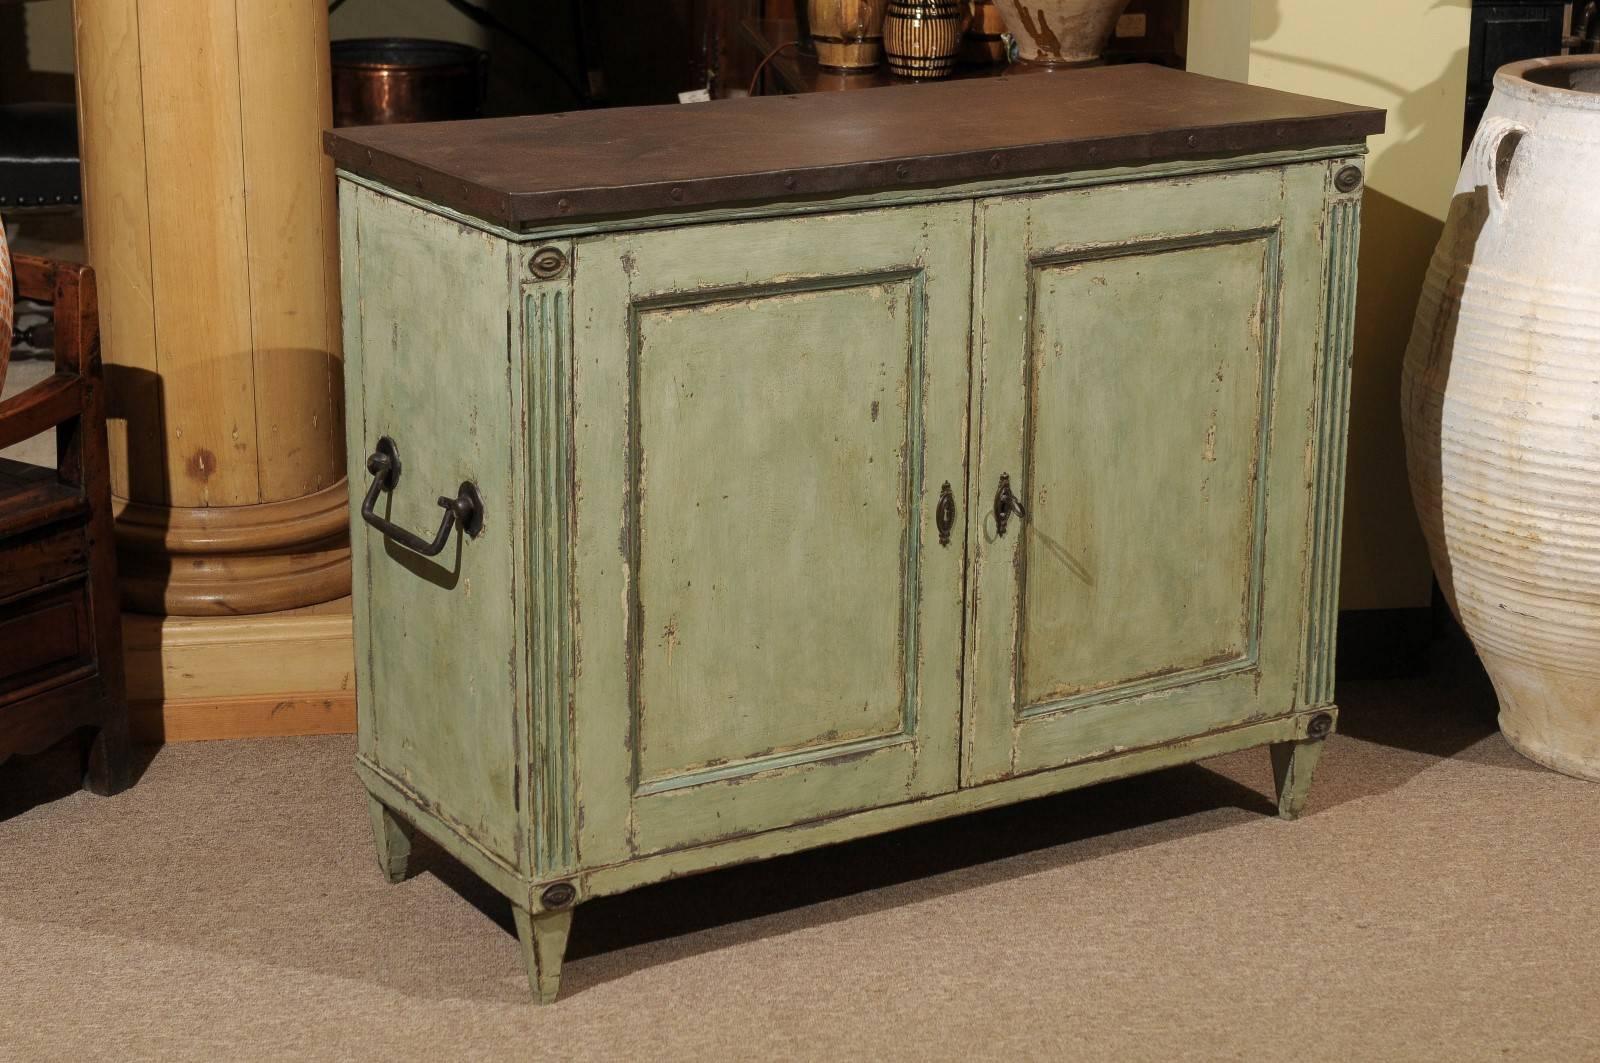 Vintage Louis XVI Style  Painted French Buffet with Zinc Top, circa 1940
We found this buffet and thought it was very cool looking. The zinc top was recently added but gives this buffet an interesting look. The iron handles on the sides do the same